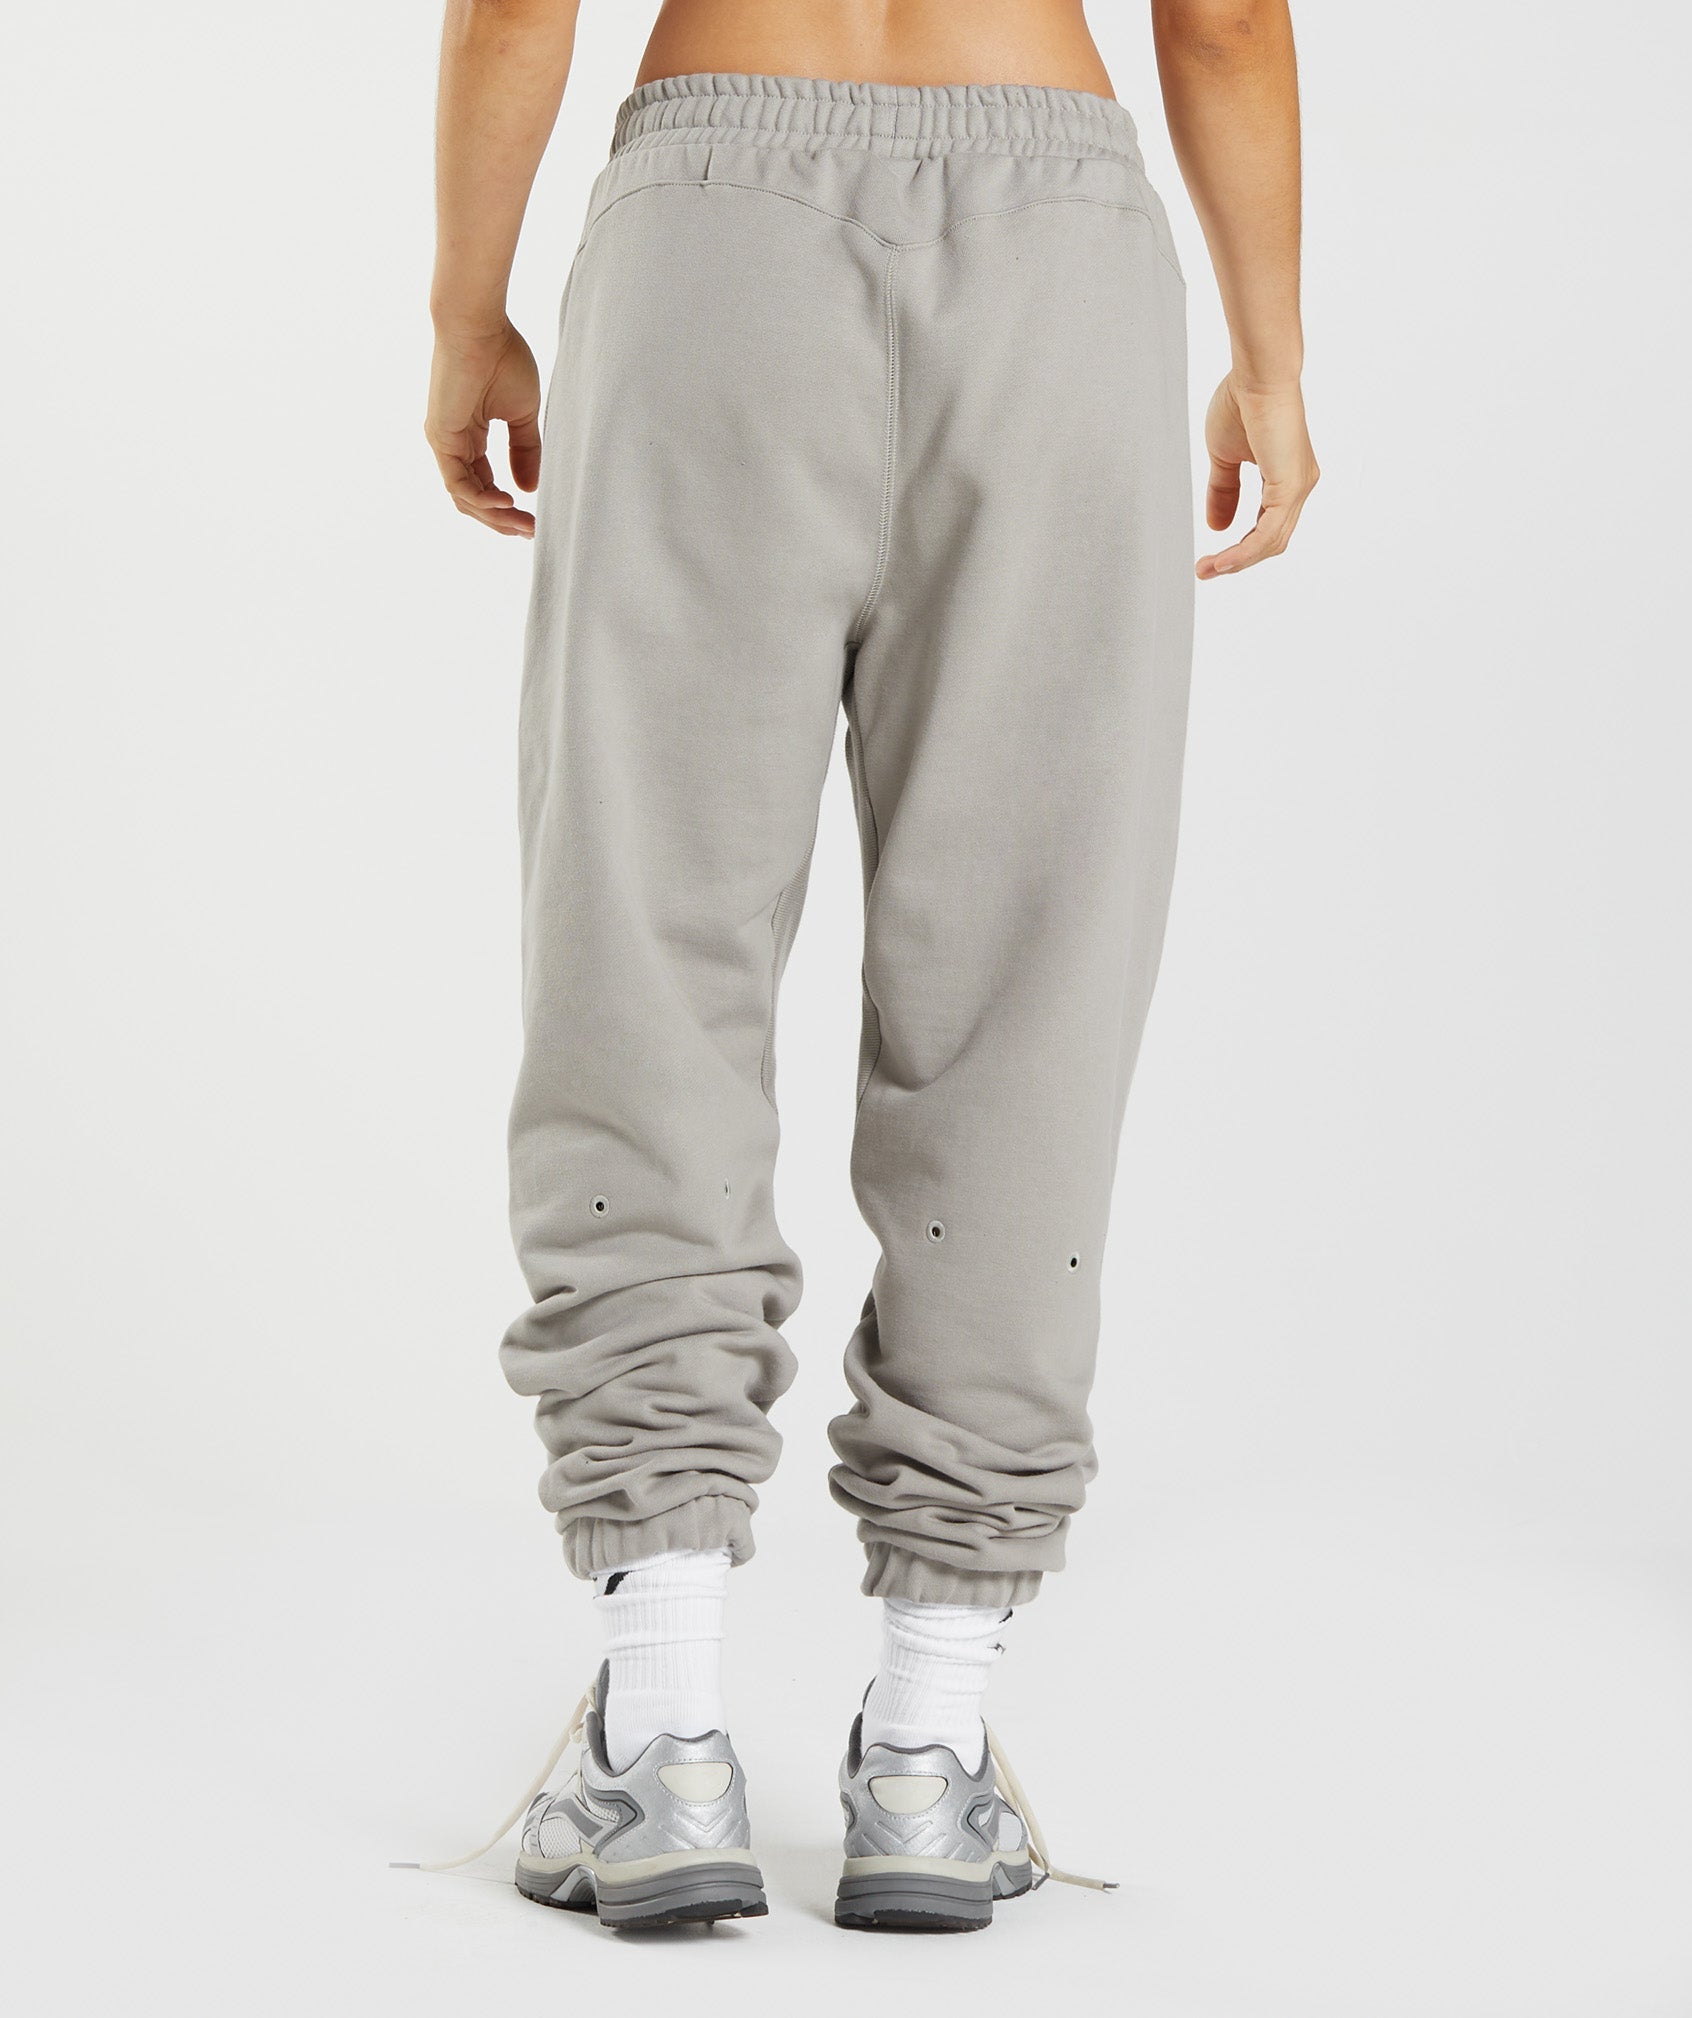 GS10 Year Joggers in Ecru Brown - view 2